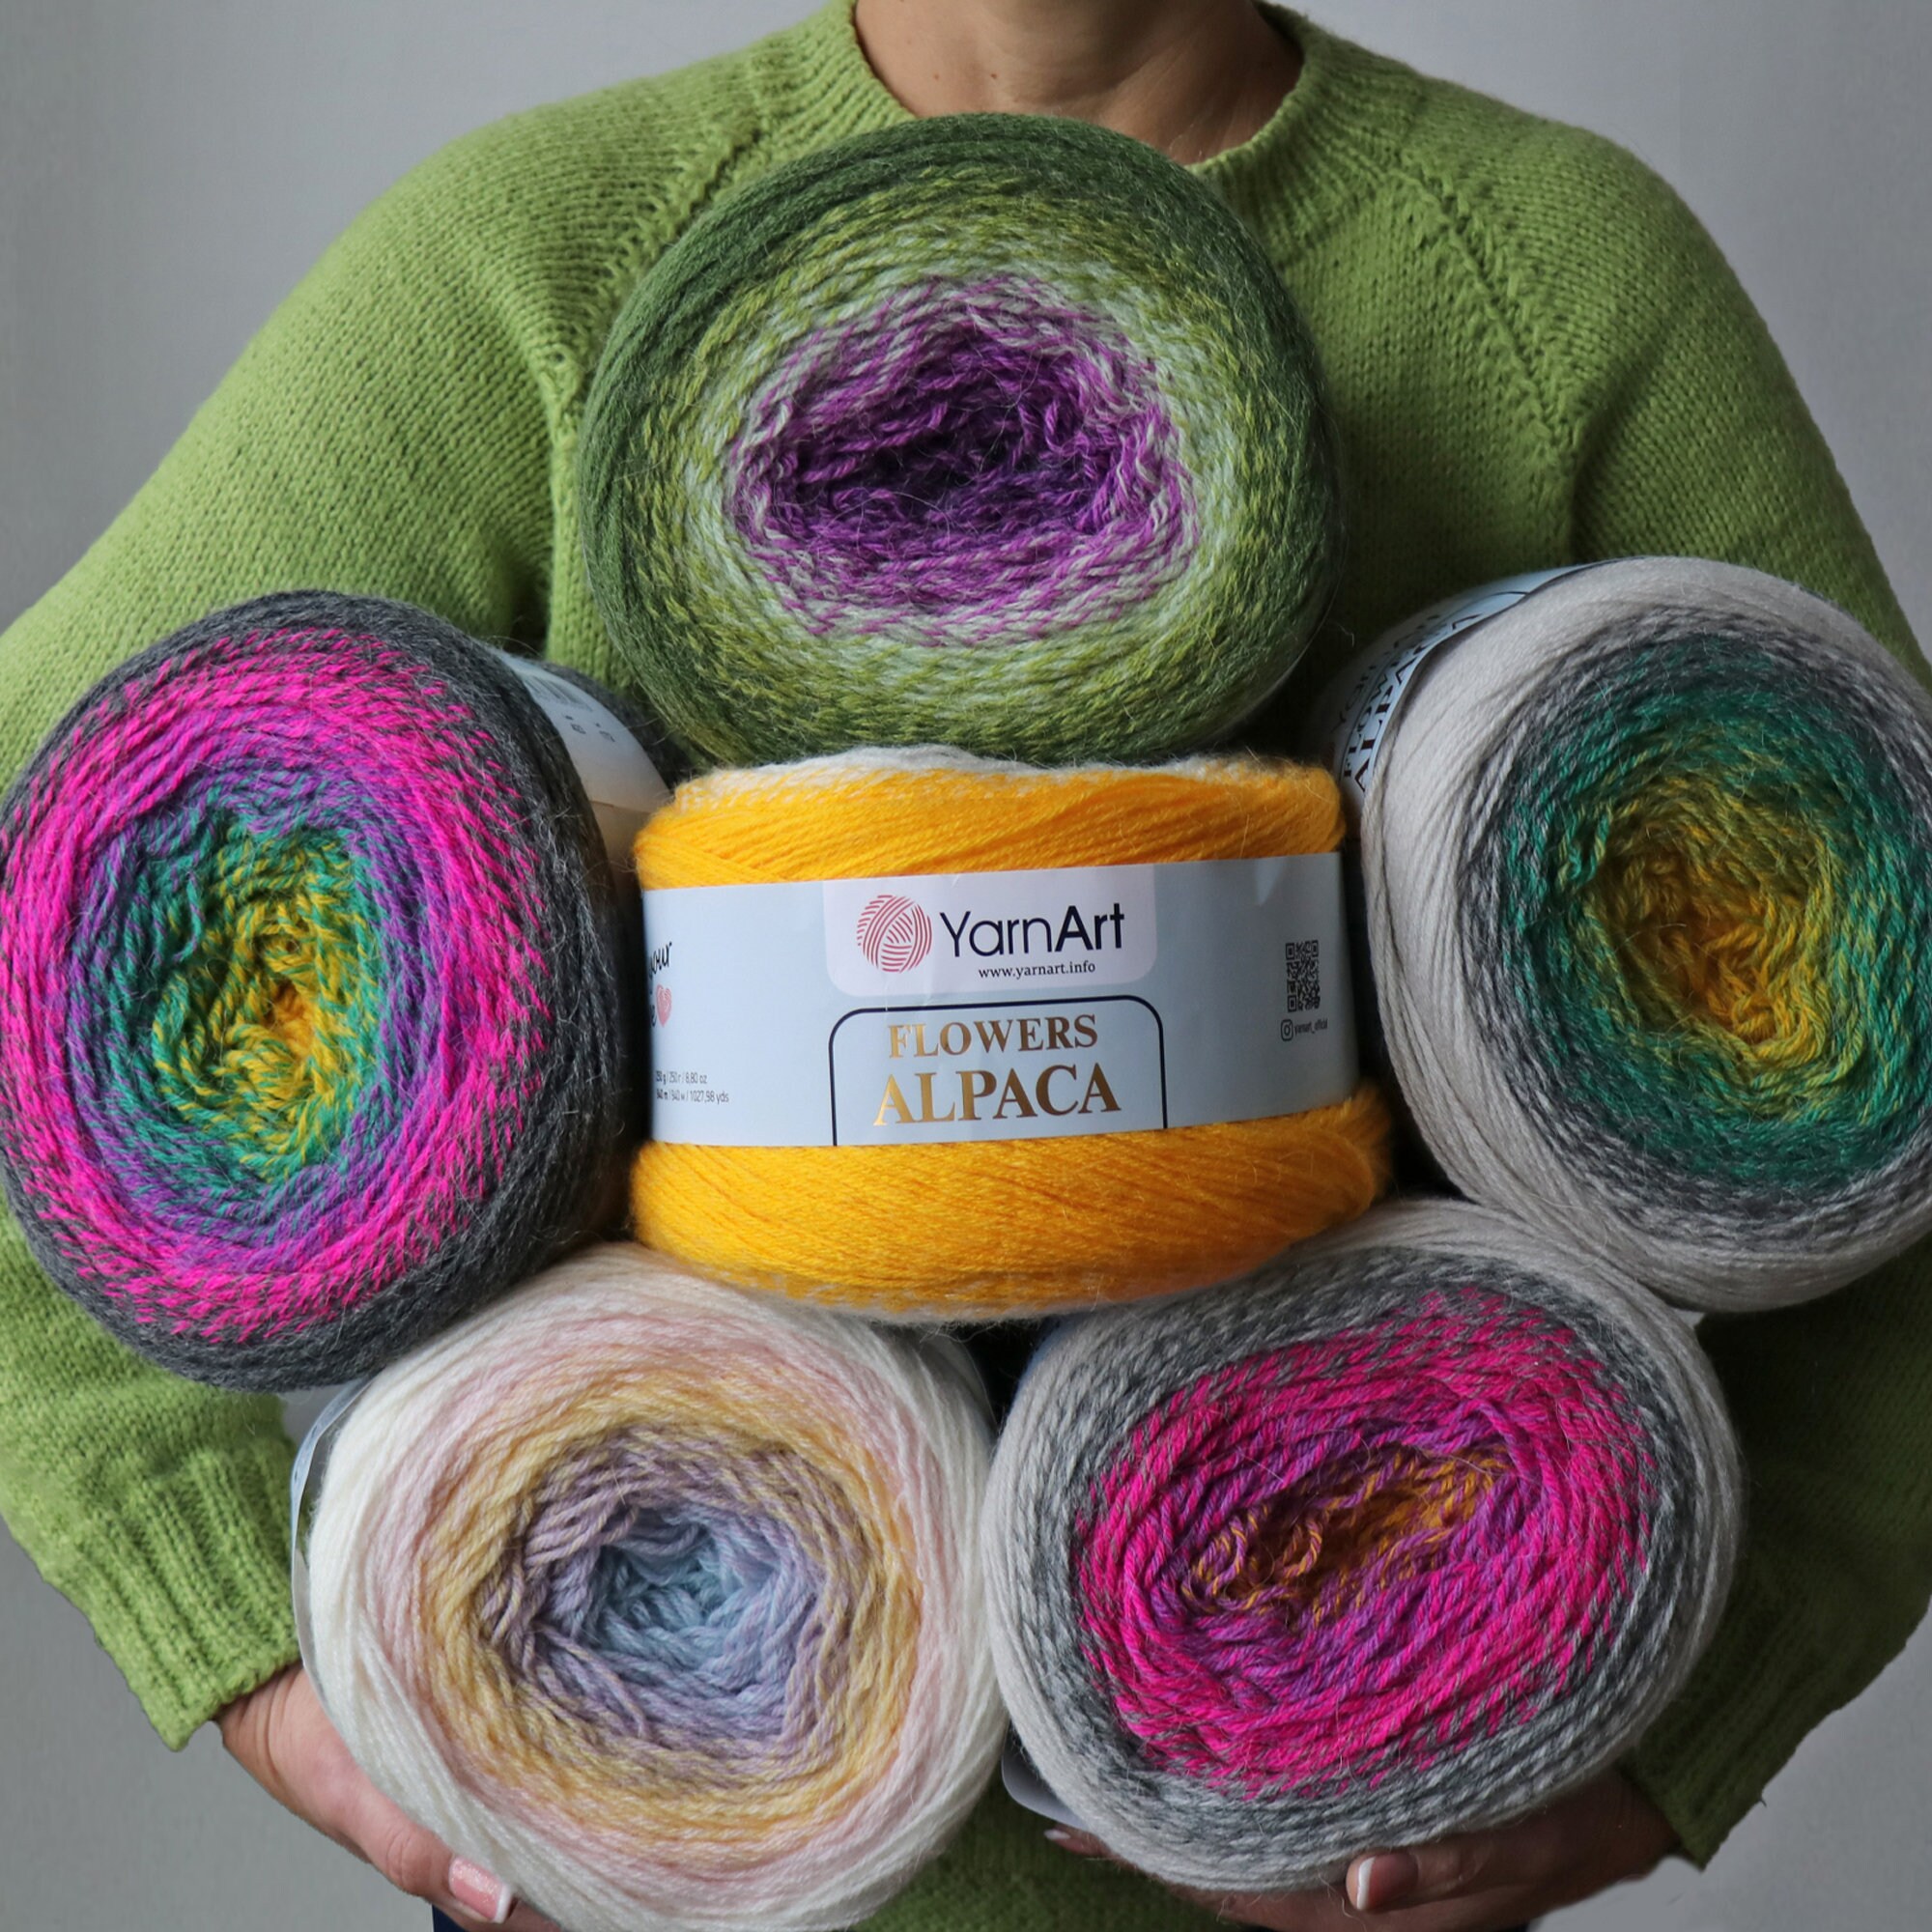 Last minute gifts for crocheters - Ready to ship gradient yarn on